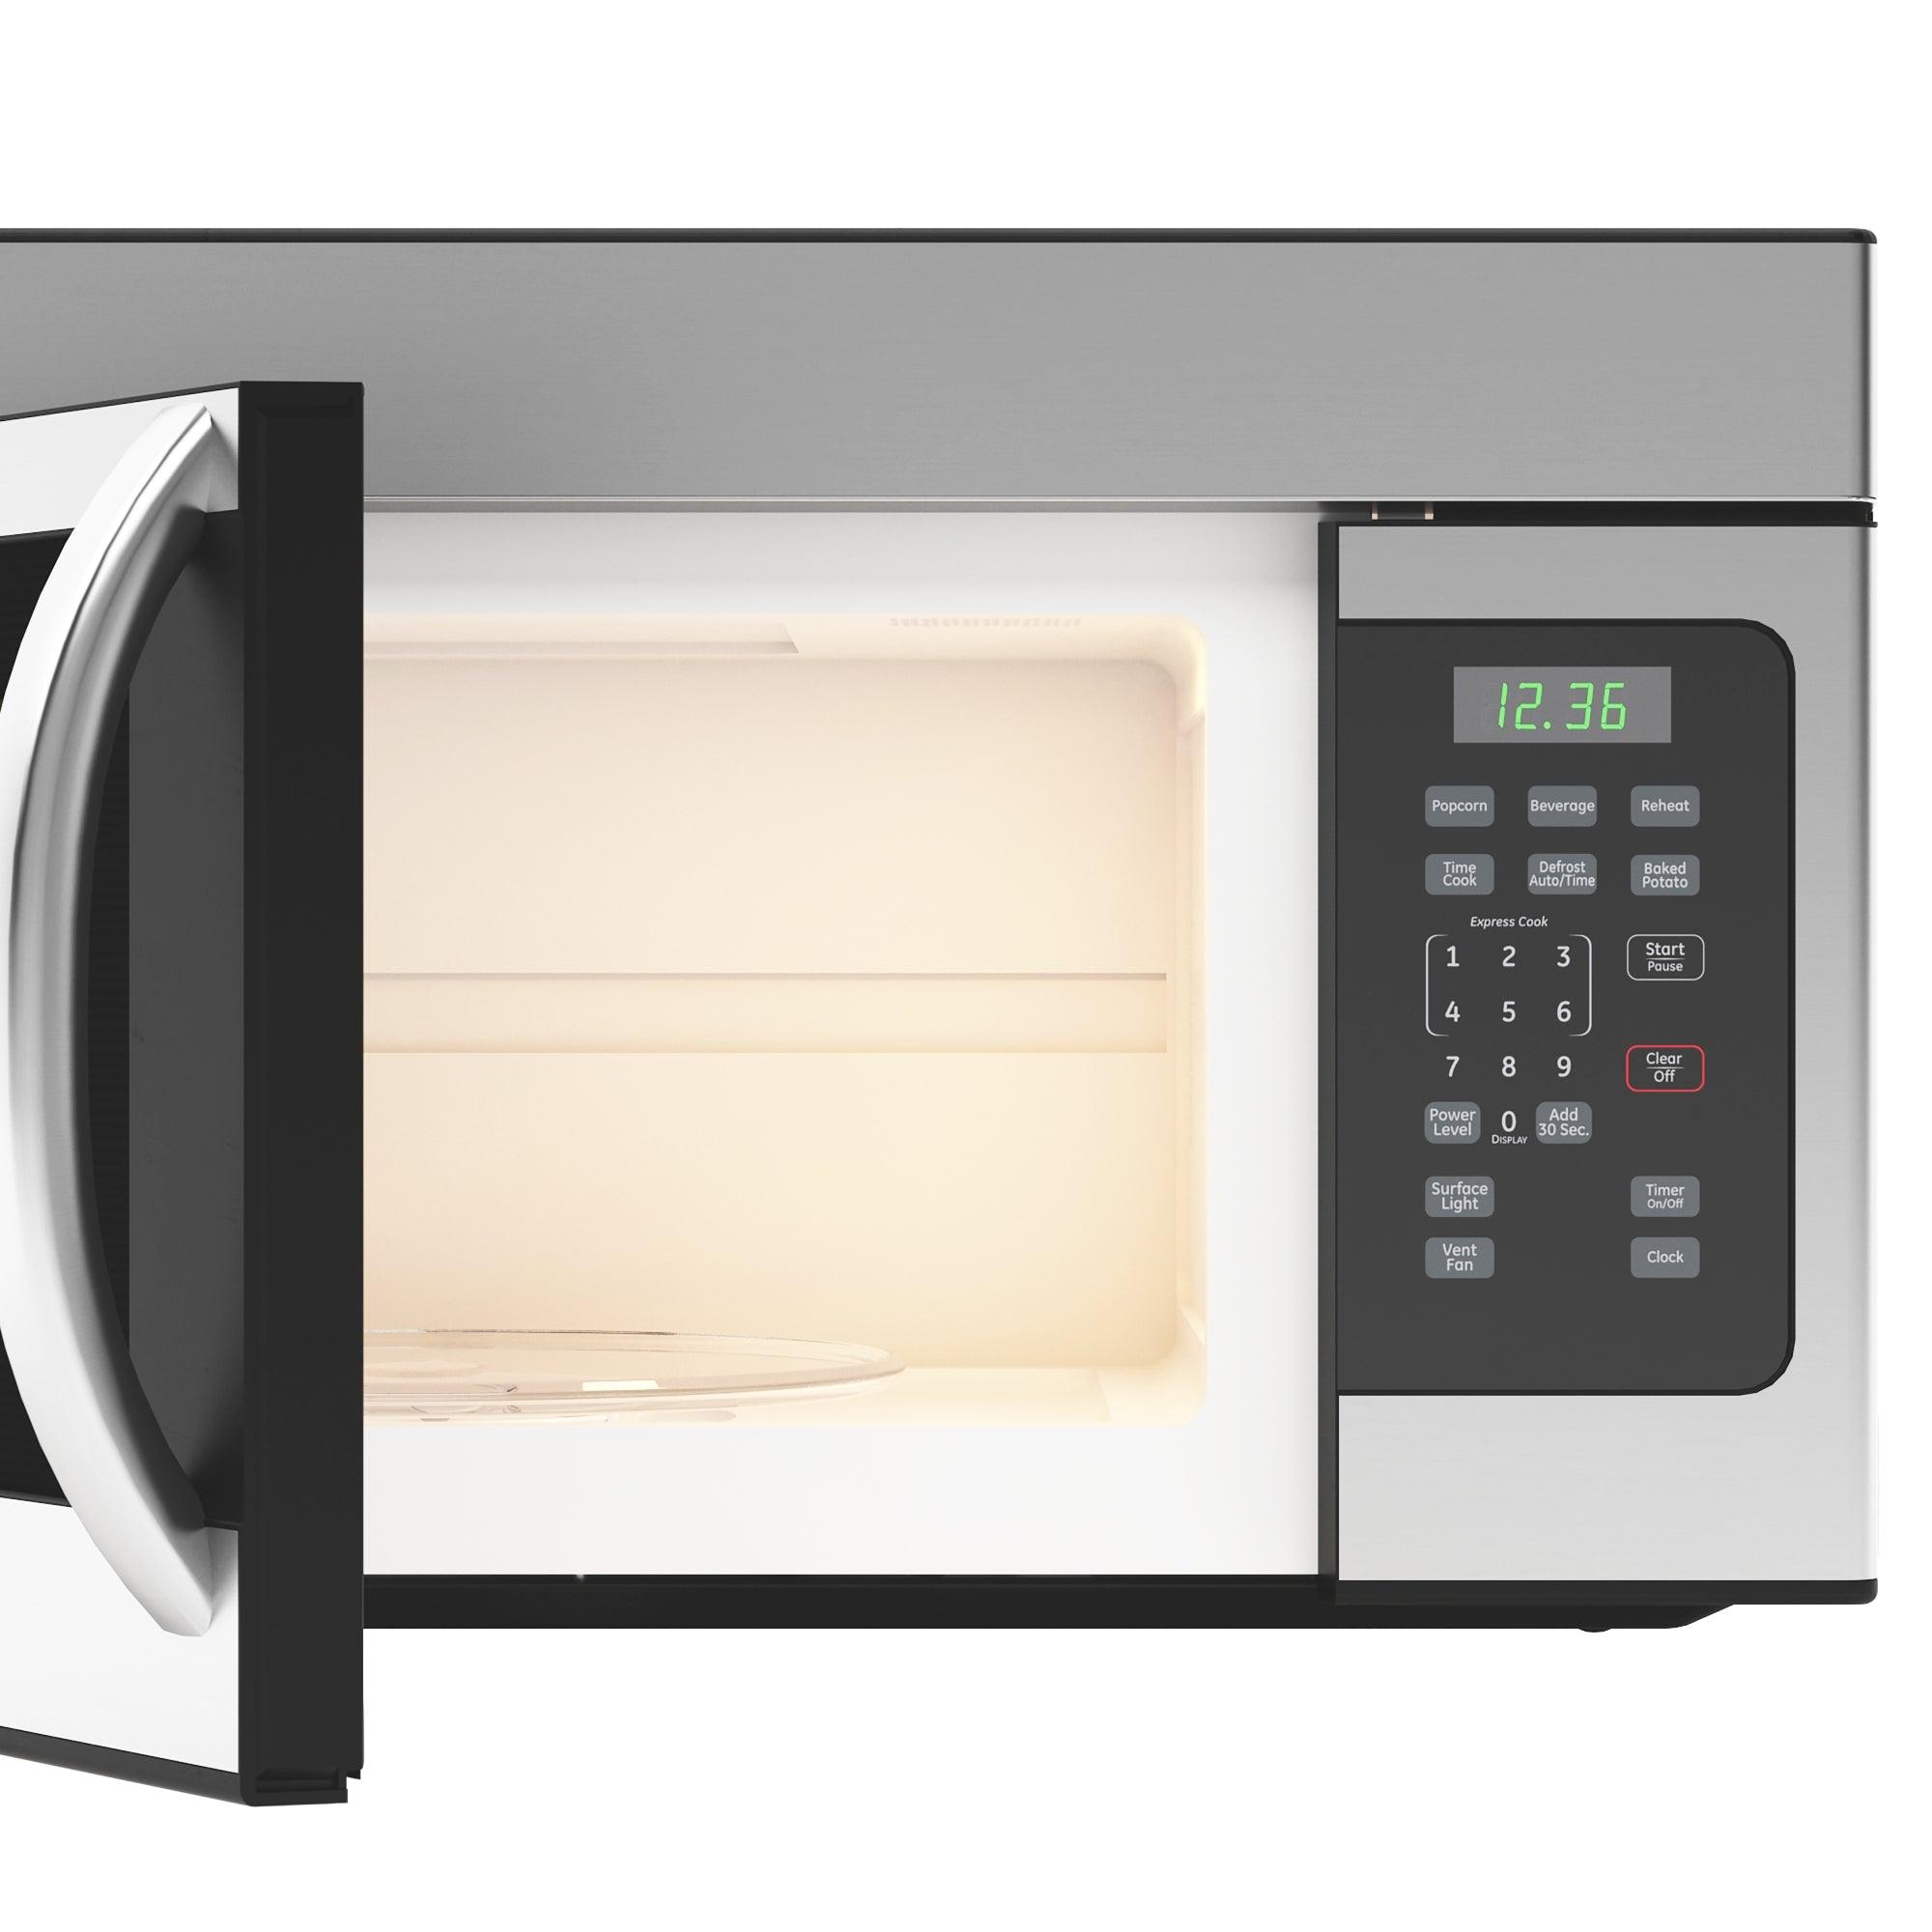 1.6 cu. ft. Over the Range Stainless Steel Microwave, KM-MOT-1SS. - - VirtuousWares:Global